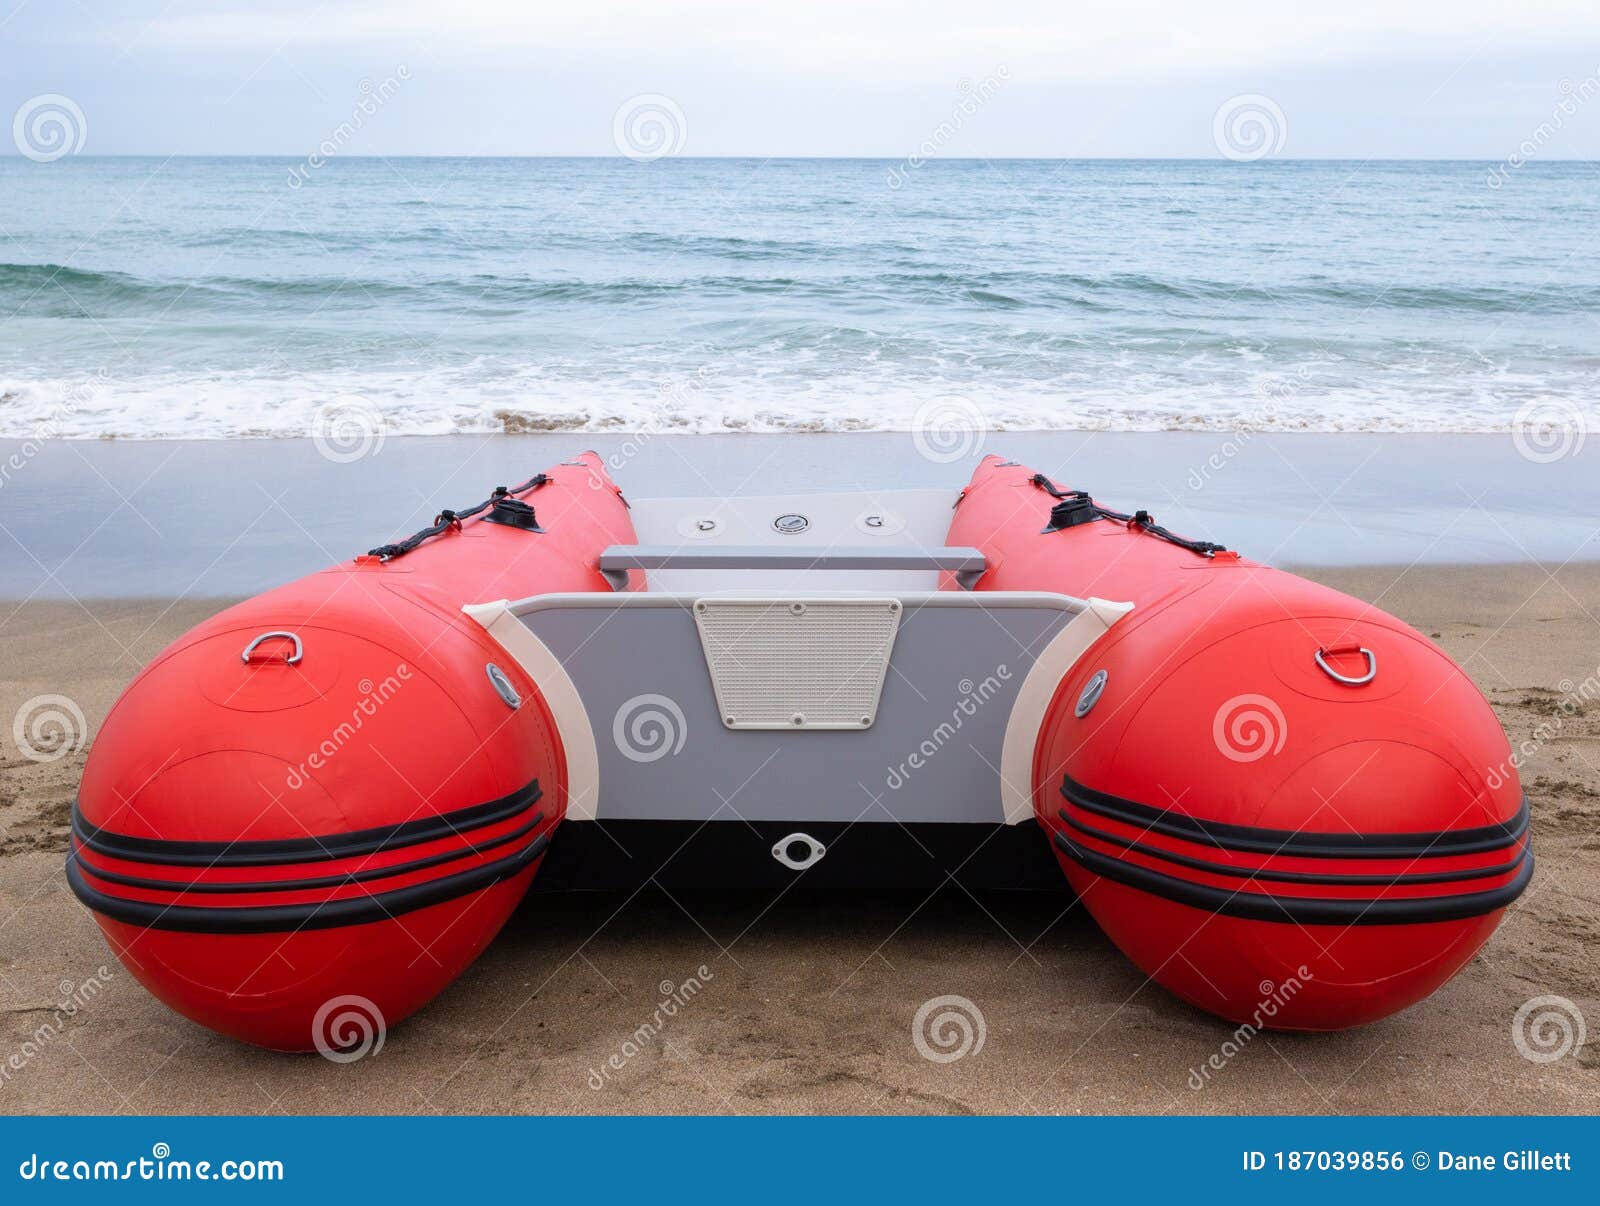 Rigid hull inflatable boat with outboard motor in the shore beaten by the  waves. Used to fish at sea Stock Photo by wirestock